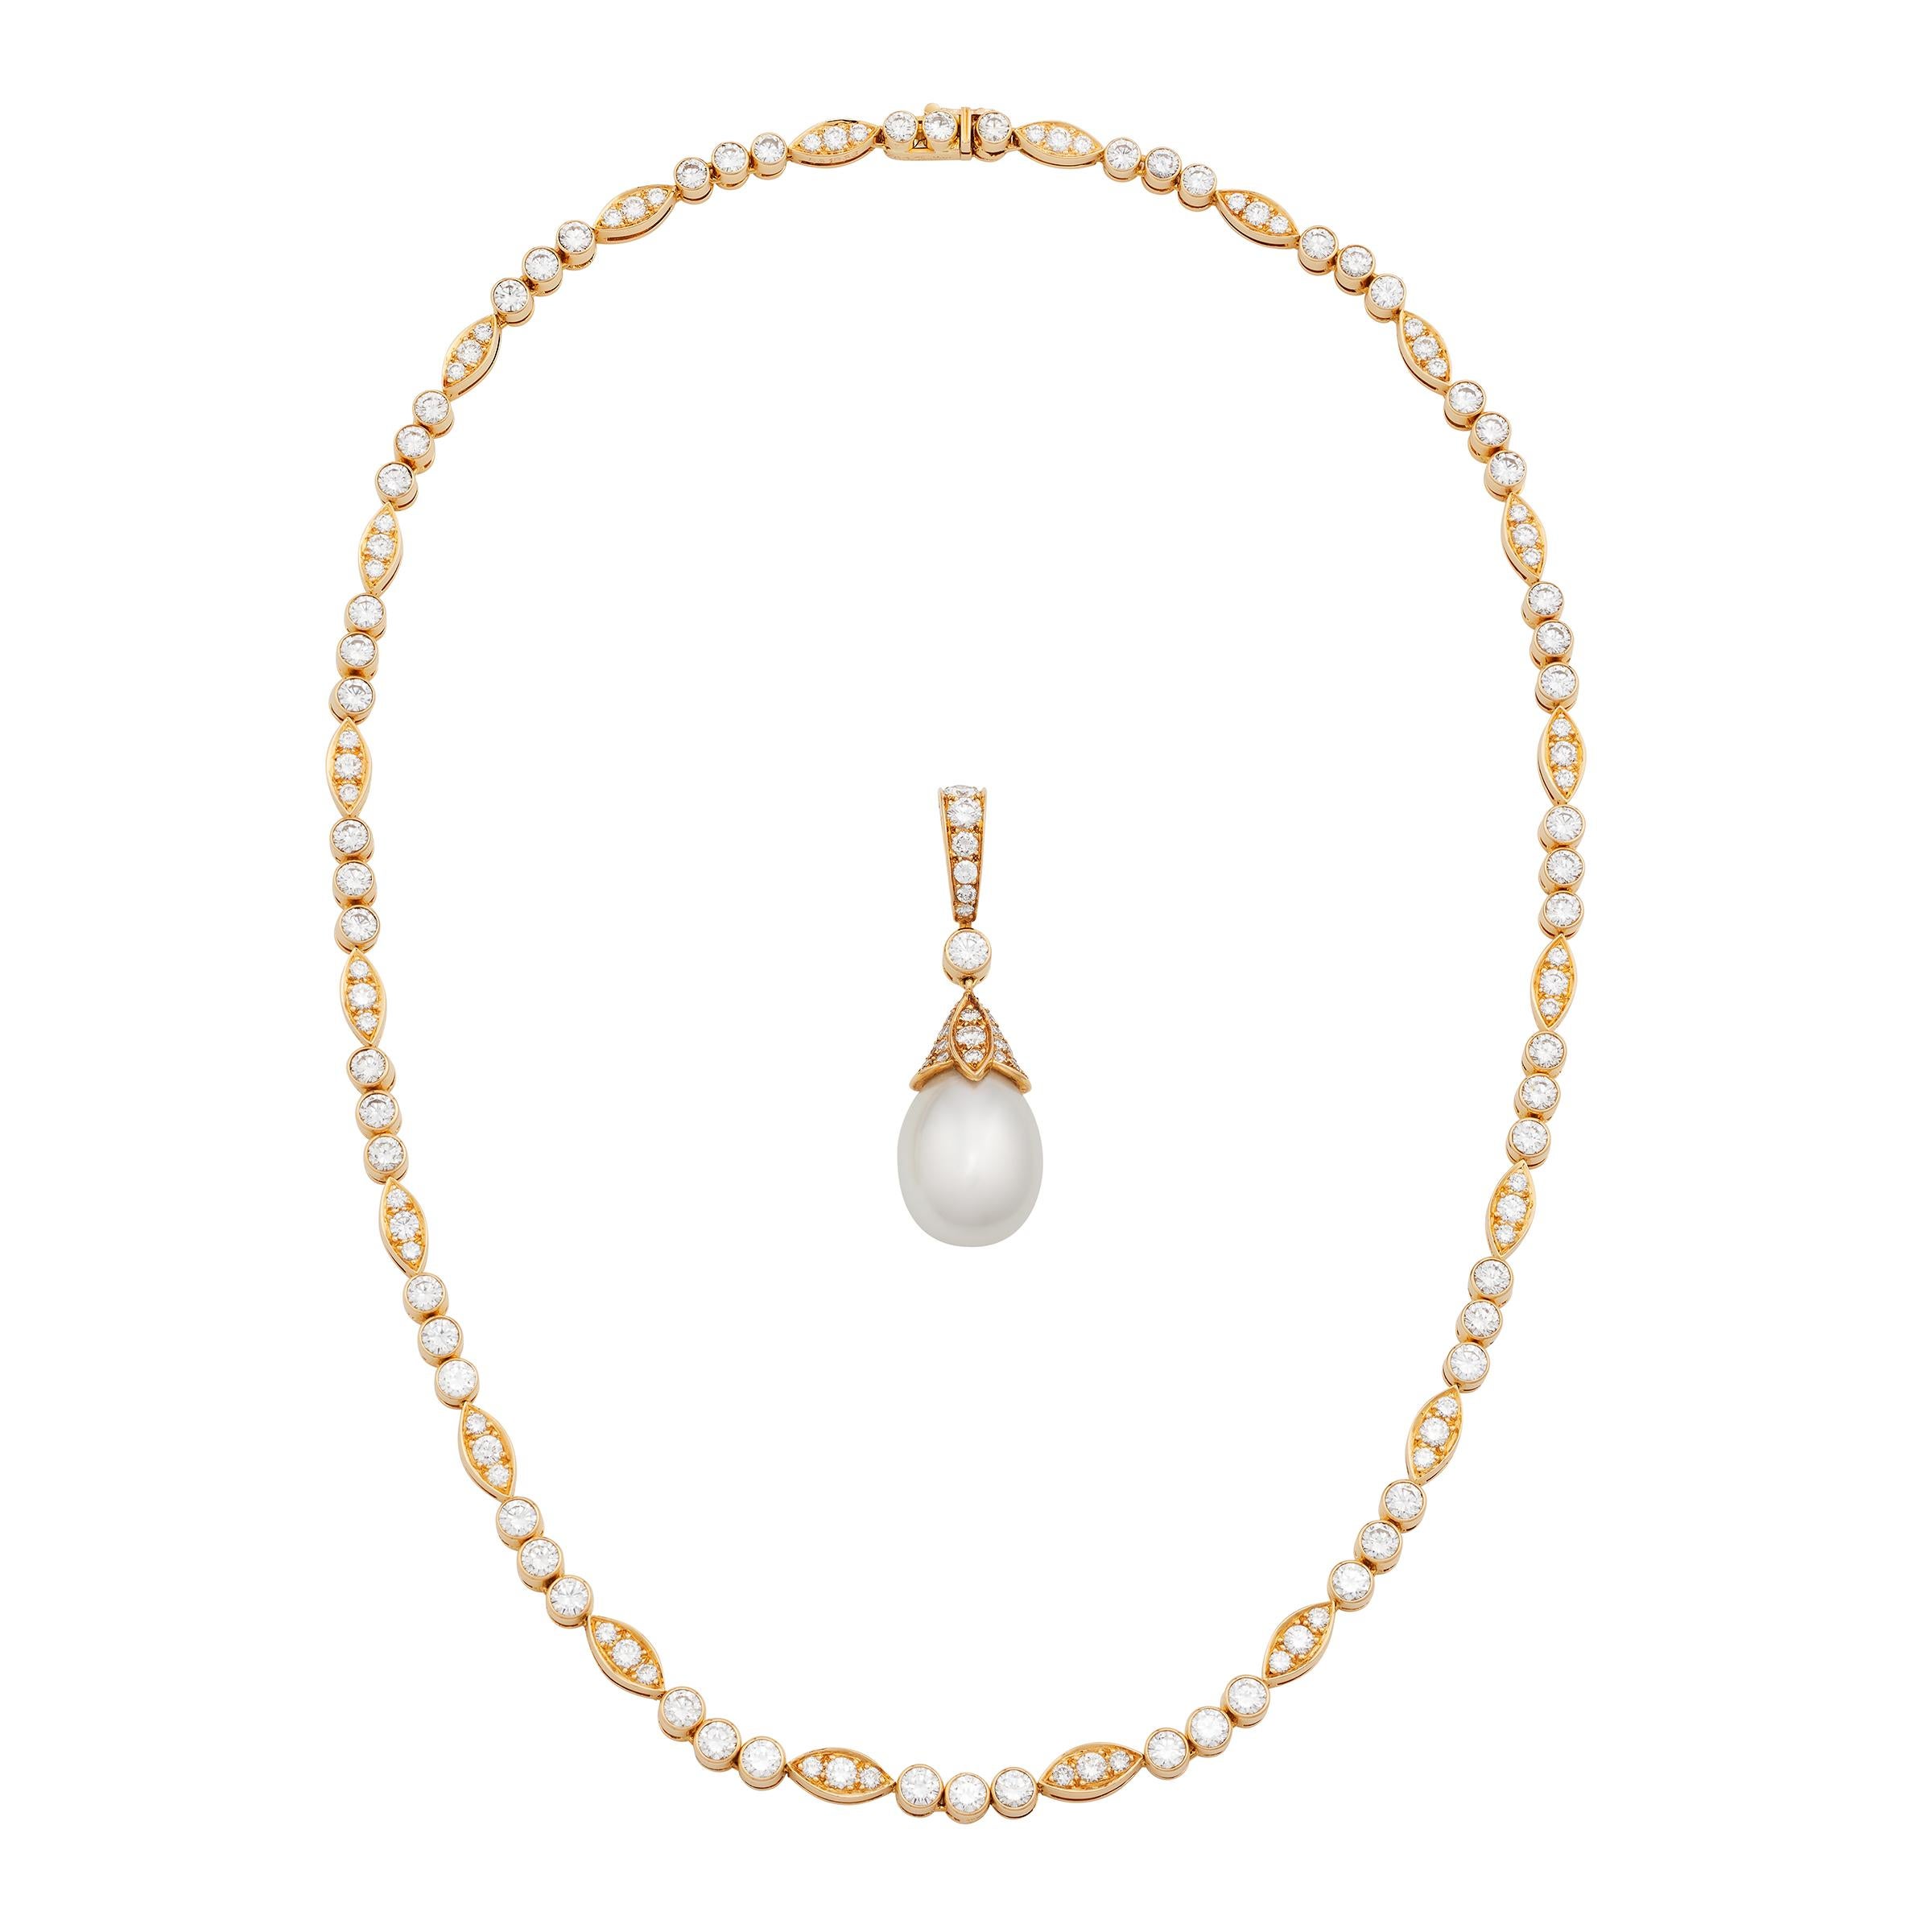 Cartier Diamond Line Necklace and Pearl Drop Pendant in 18K Yellow Gold For Sale 9